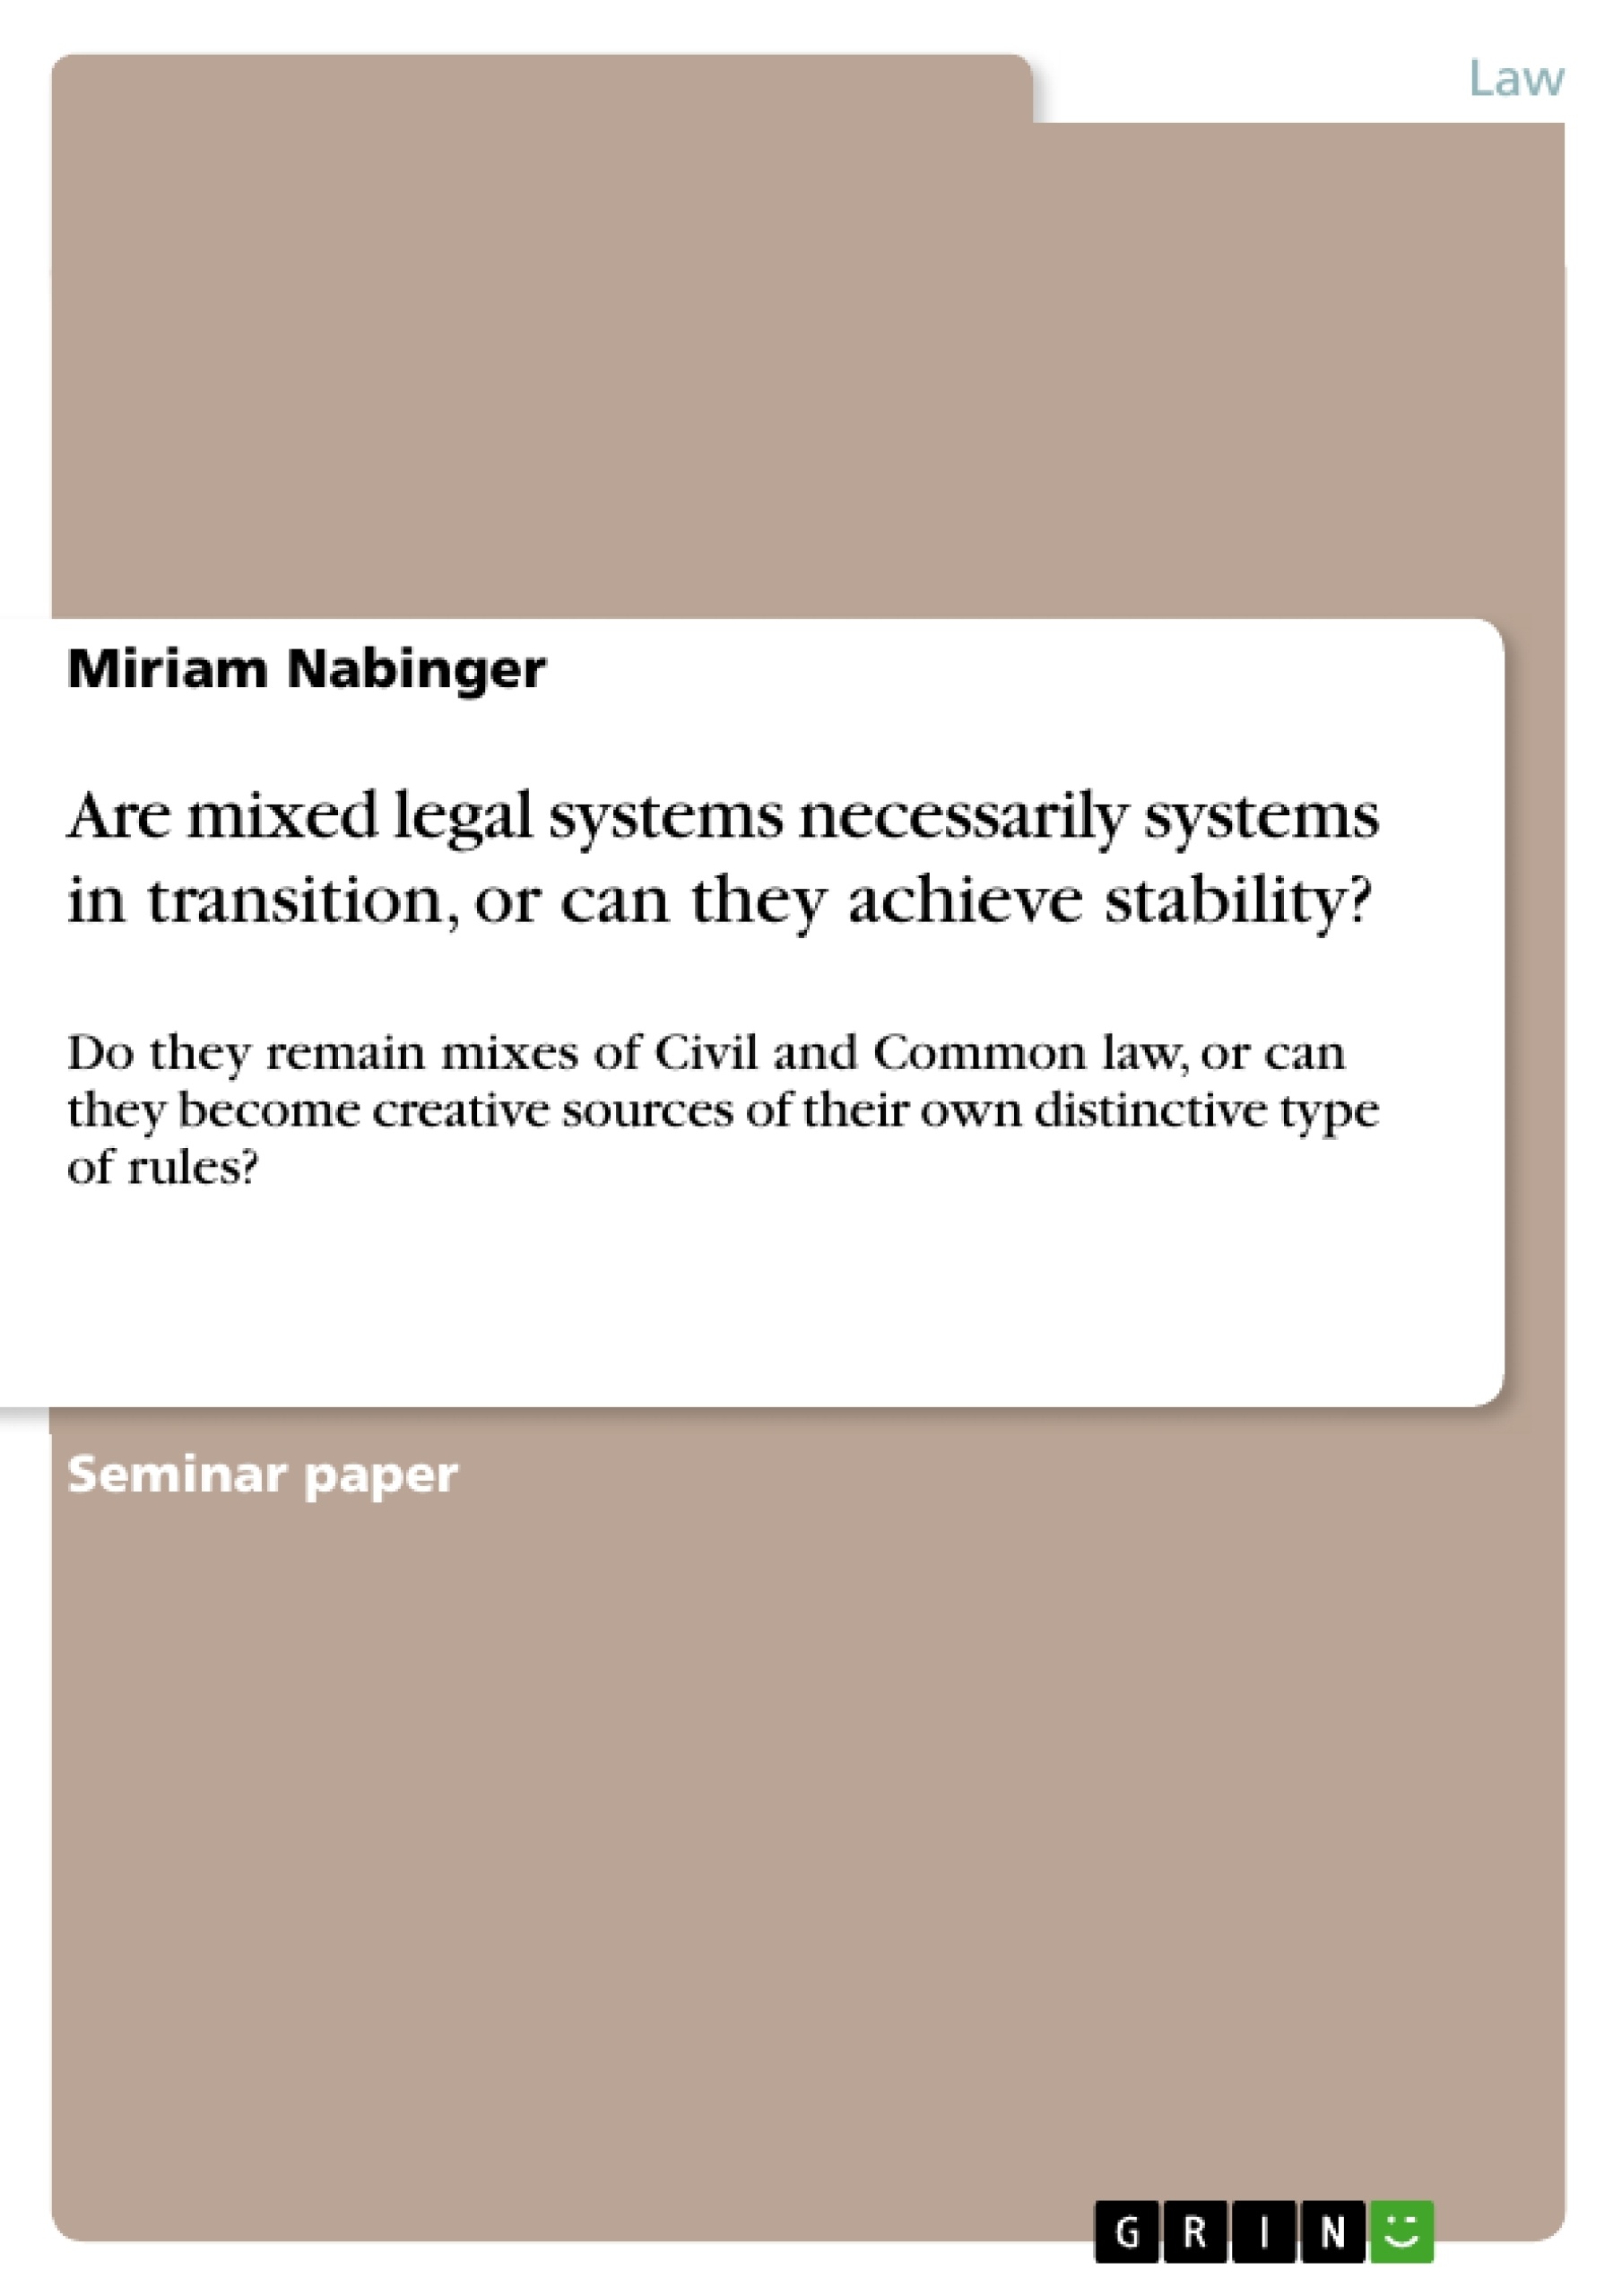 Title: Are mixed legal systems necessarily systems in transition, or can they achieve stability?